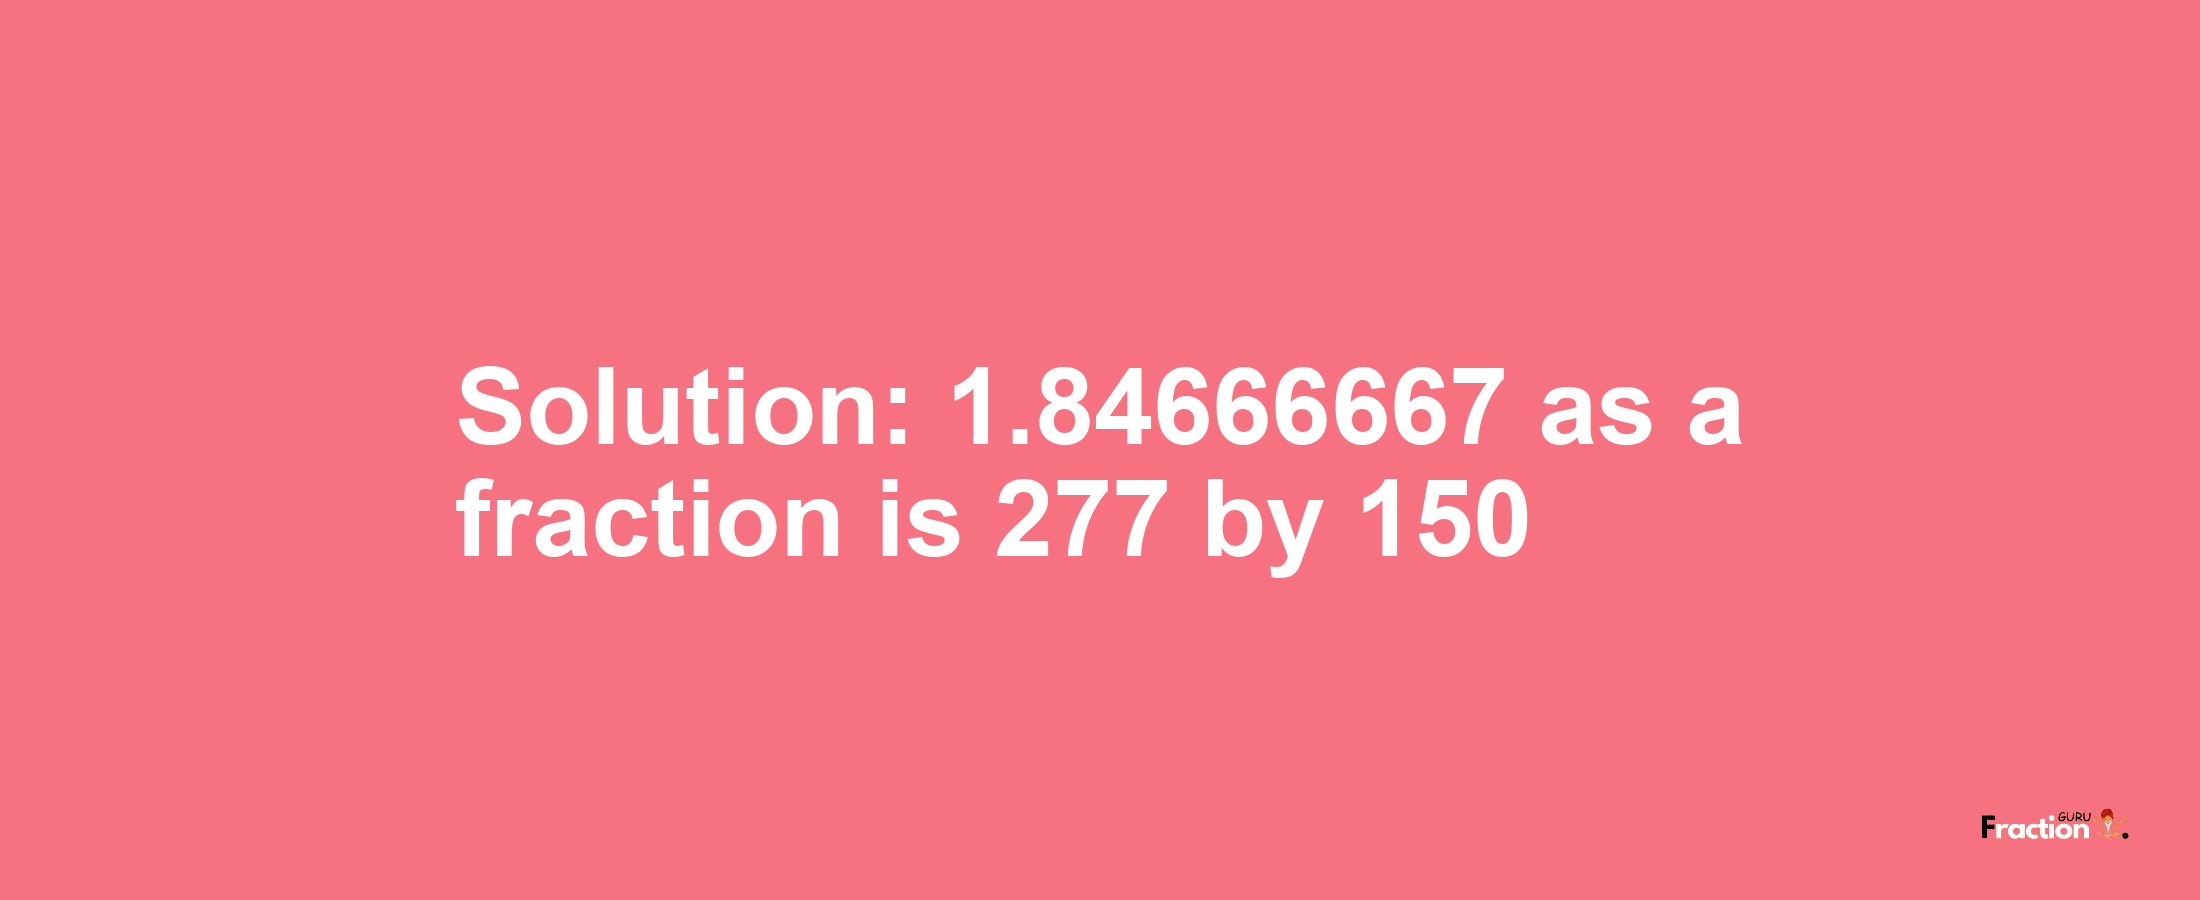 Solution:1.84666667 as a fraction is 277/150